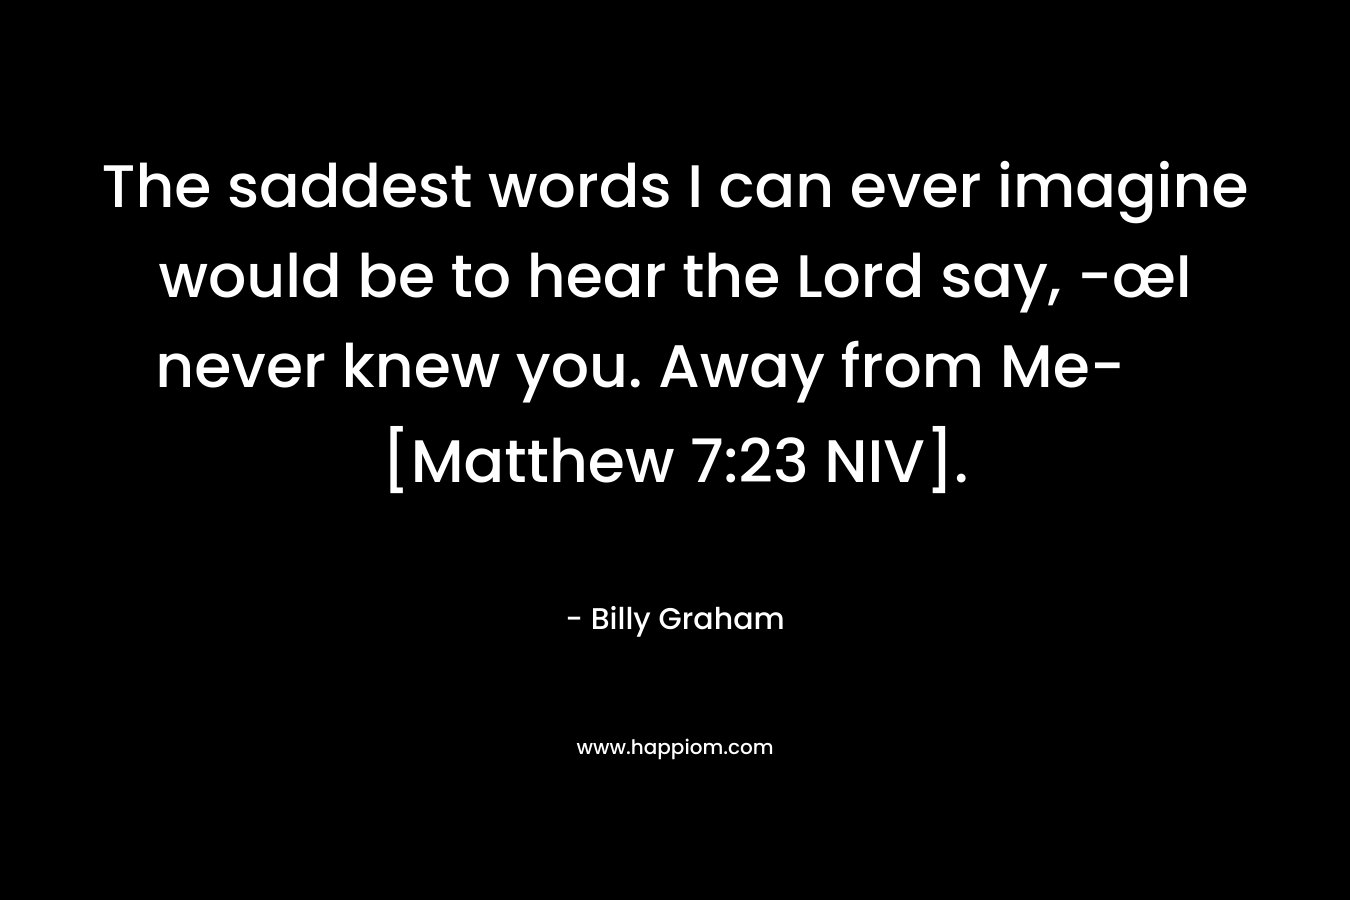 The saddest words I can ever imagine would be to hear the Lord say, -œI never knew you. Away from Me- [Matthew 7:23 NIV].